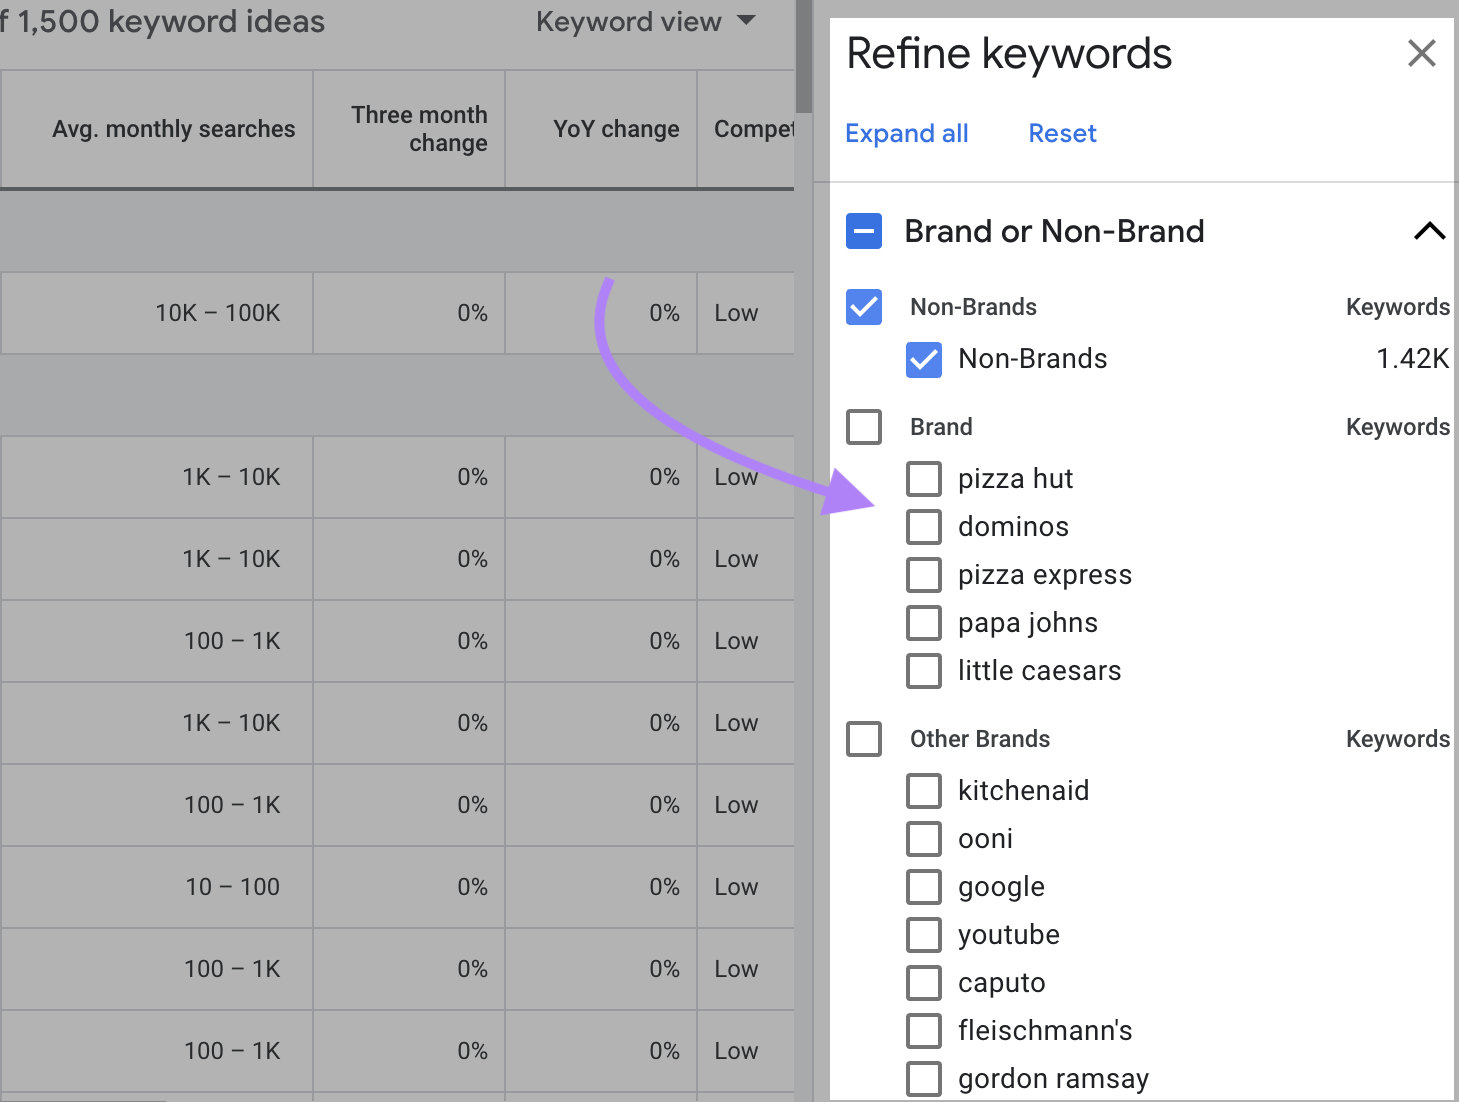 "Refine keywords" section lets users filter results to include or exclude certain terms based on different attributes